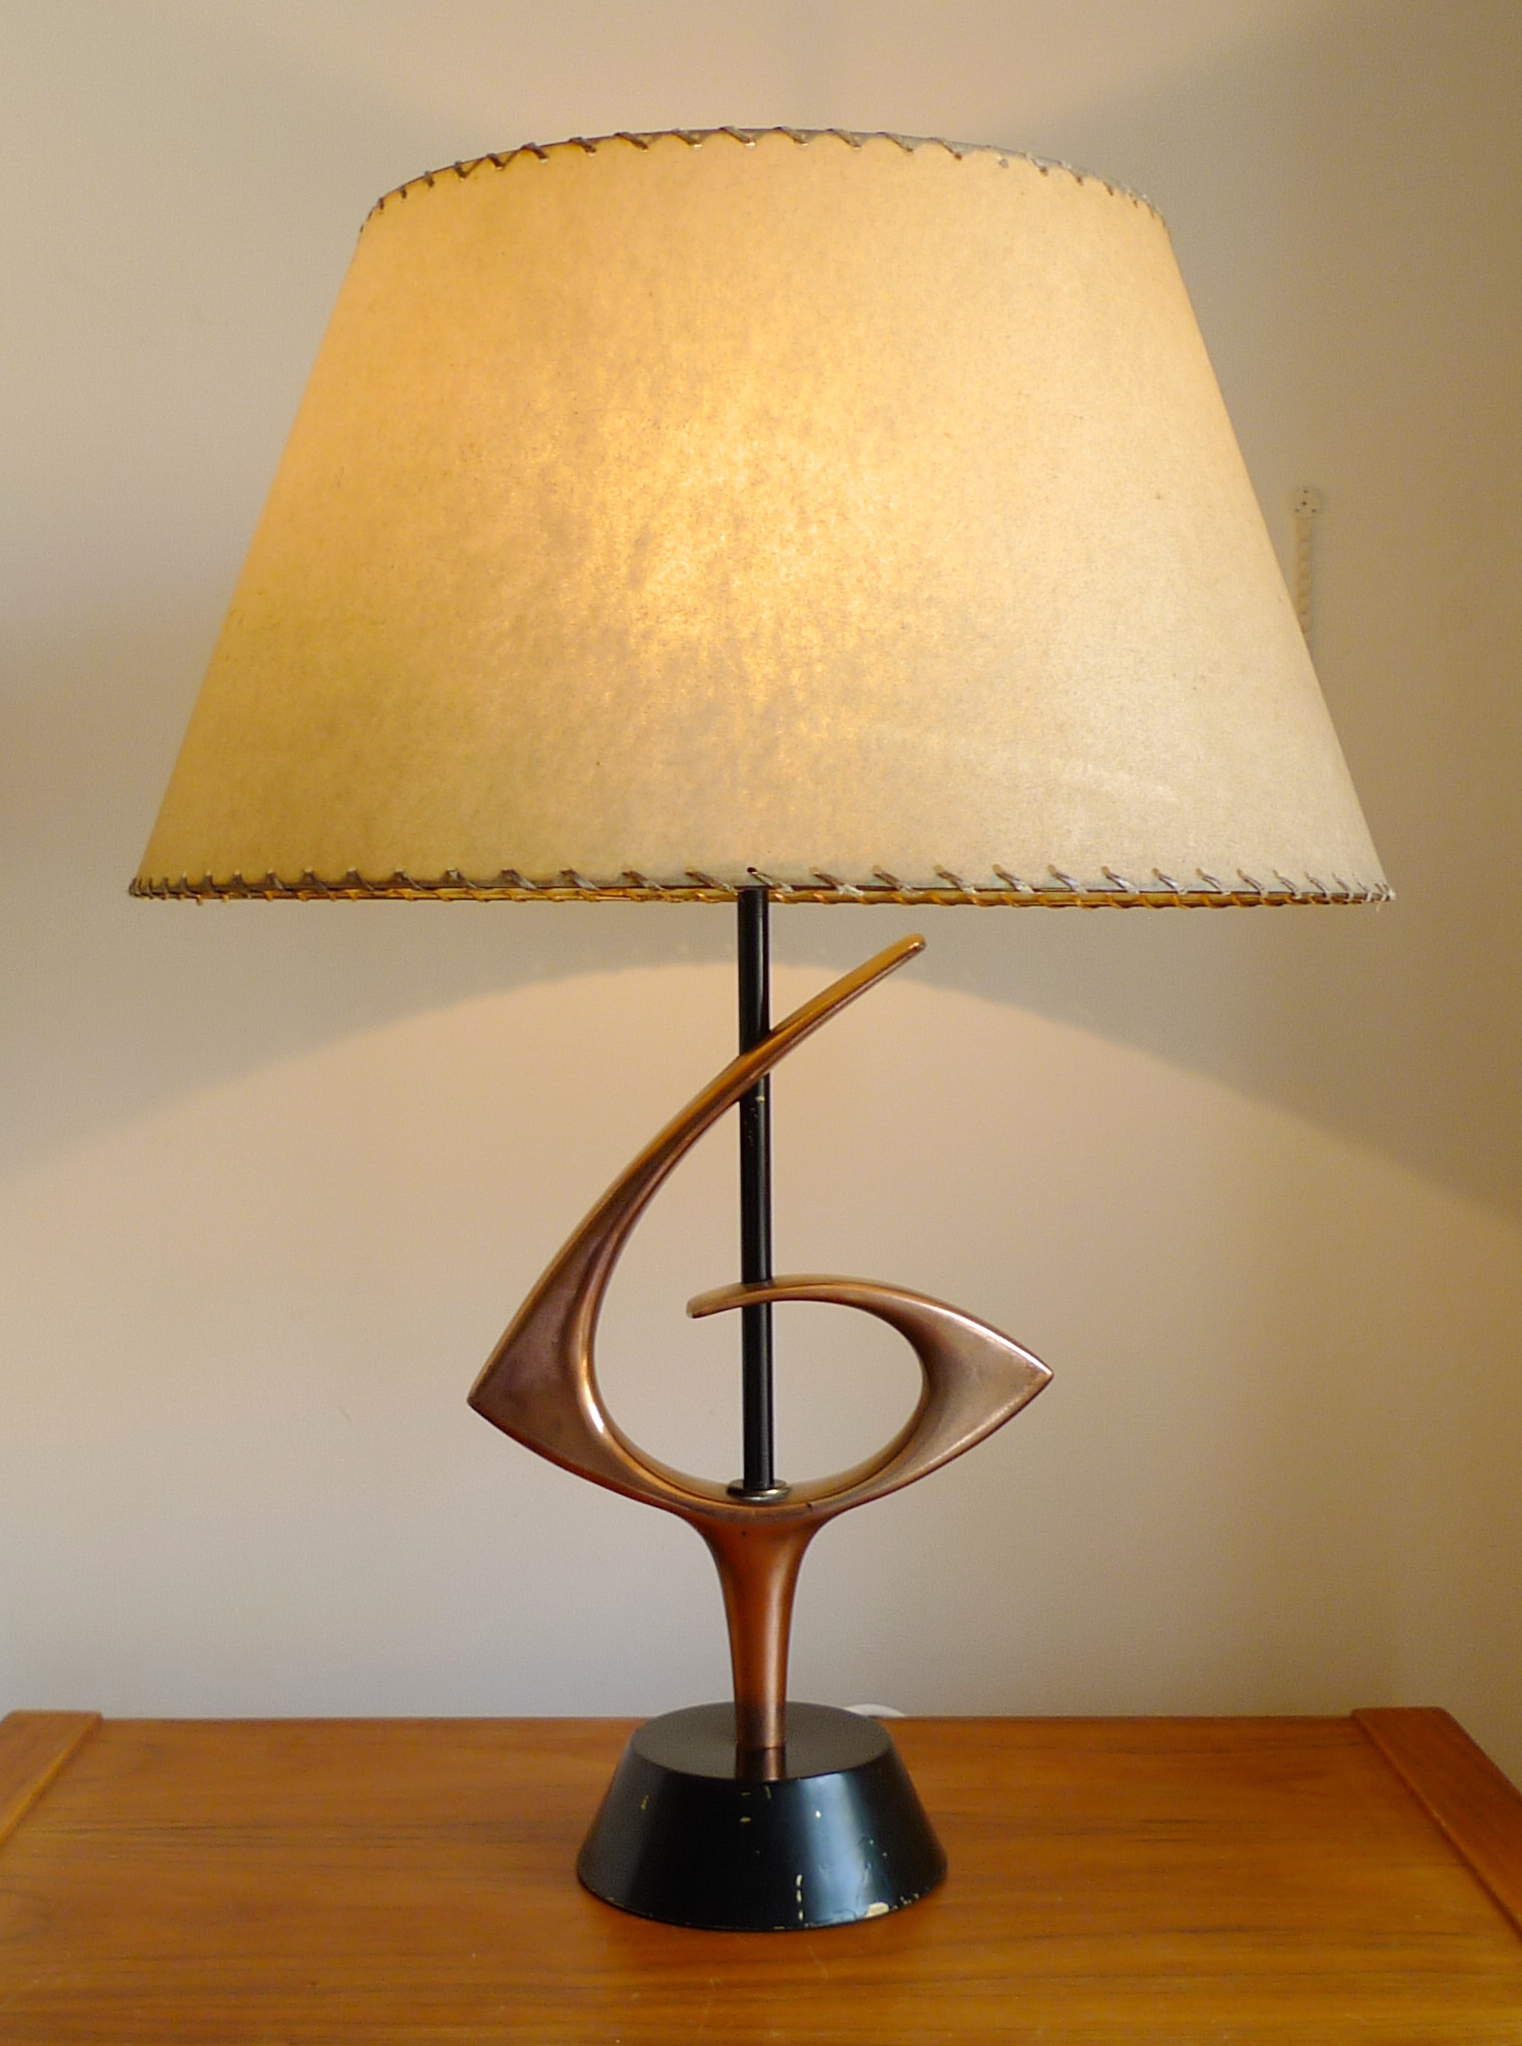 1950’s Table Lamp by Rembrandt Lamp Company with original fibreglass shade